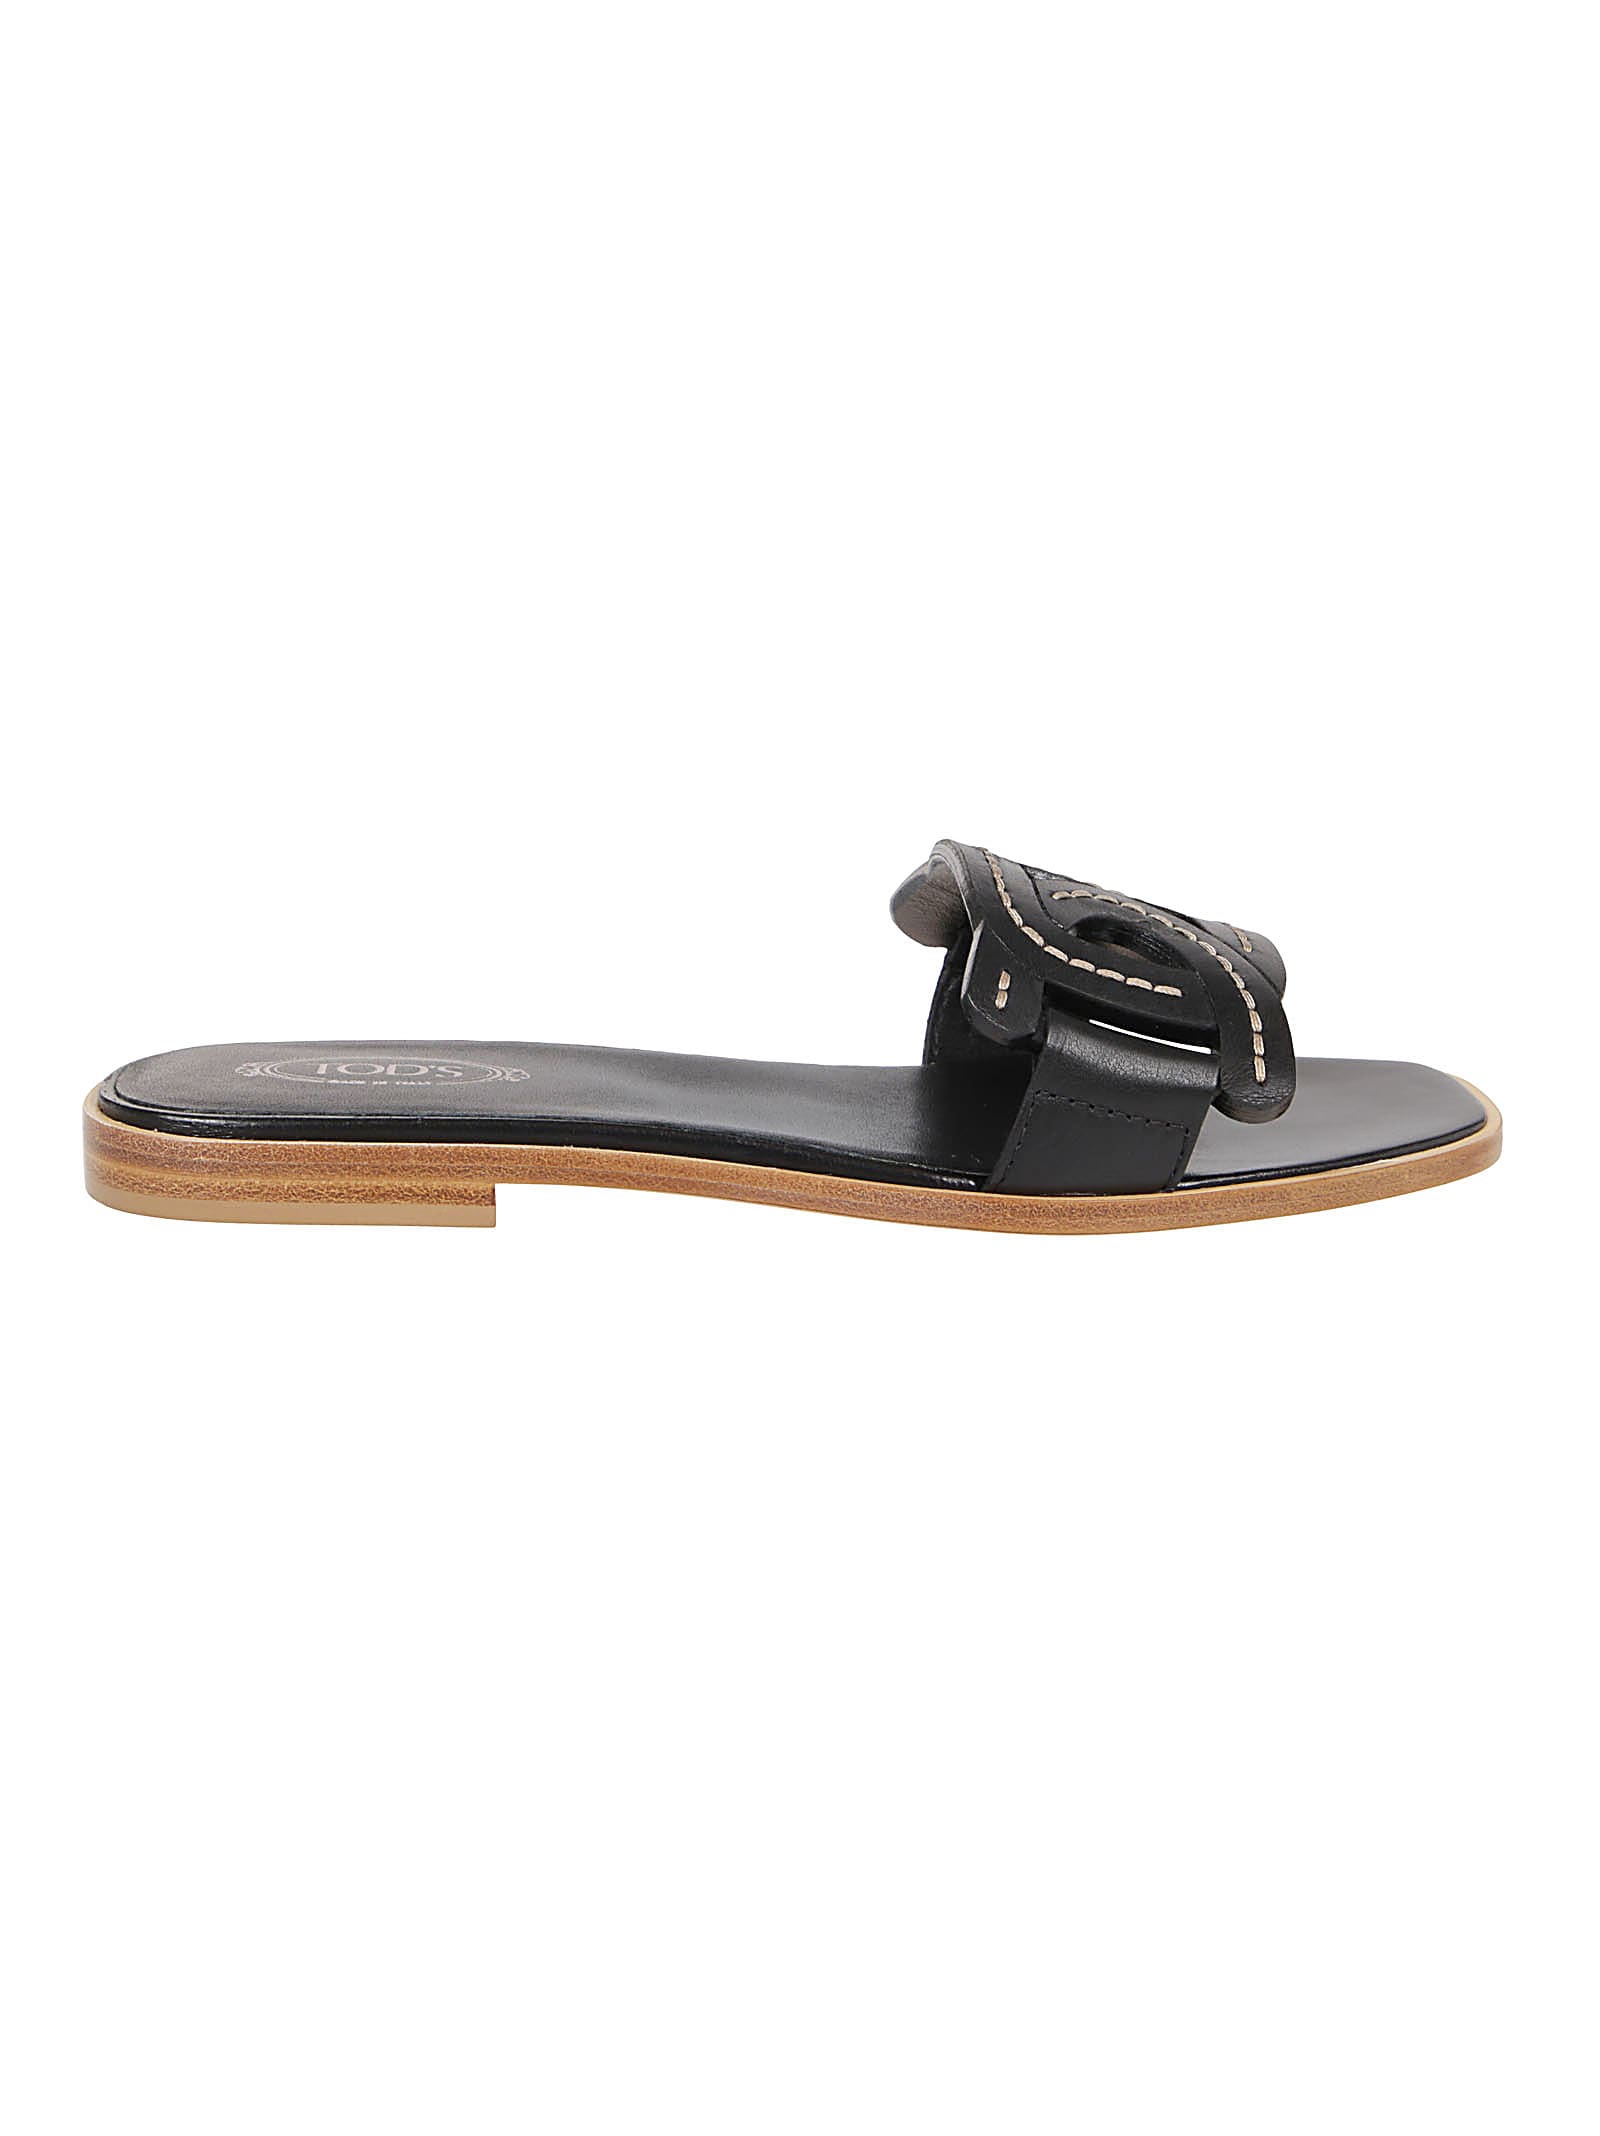 Buy Tods 05 Sandals online, shop Tods shoes with free shipping